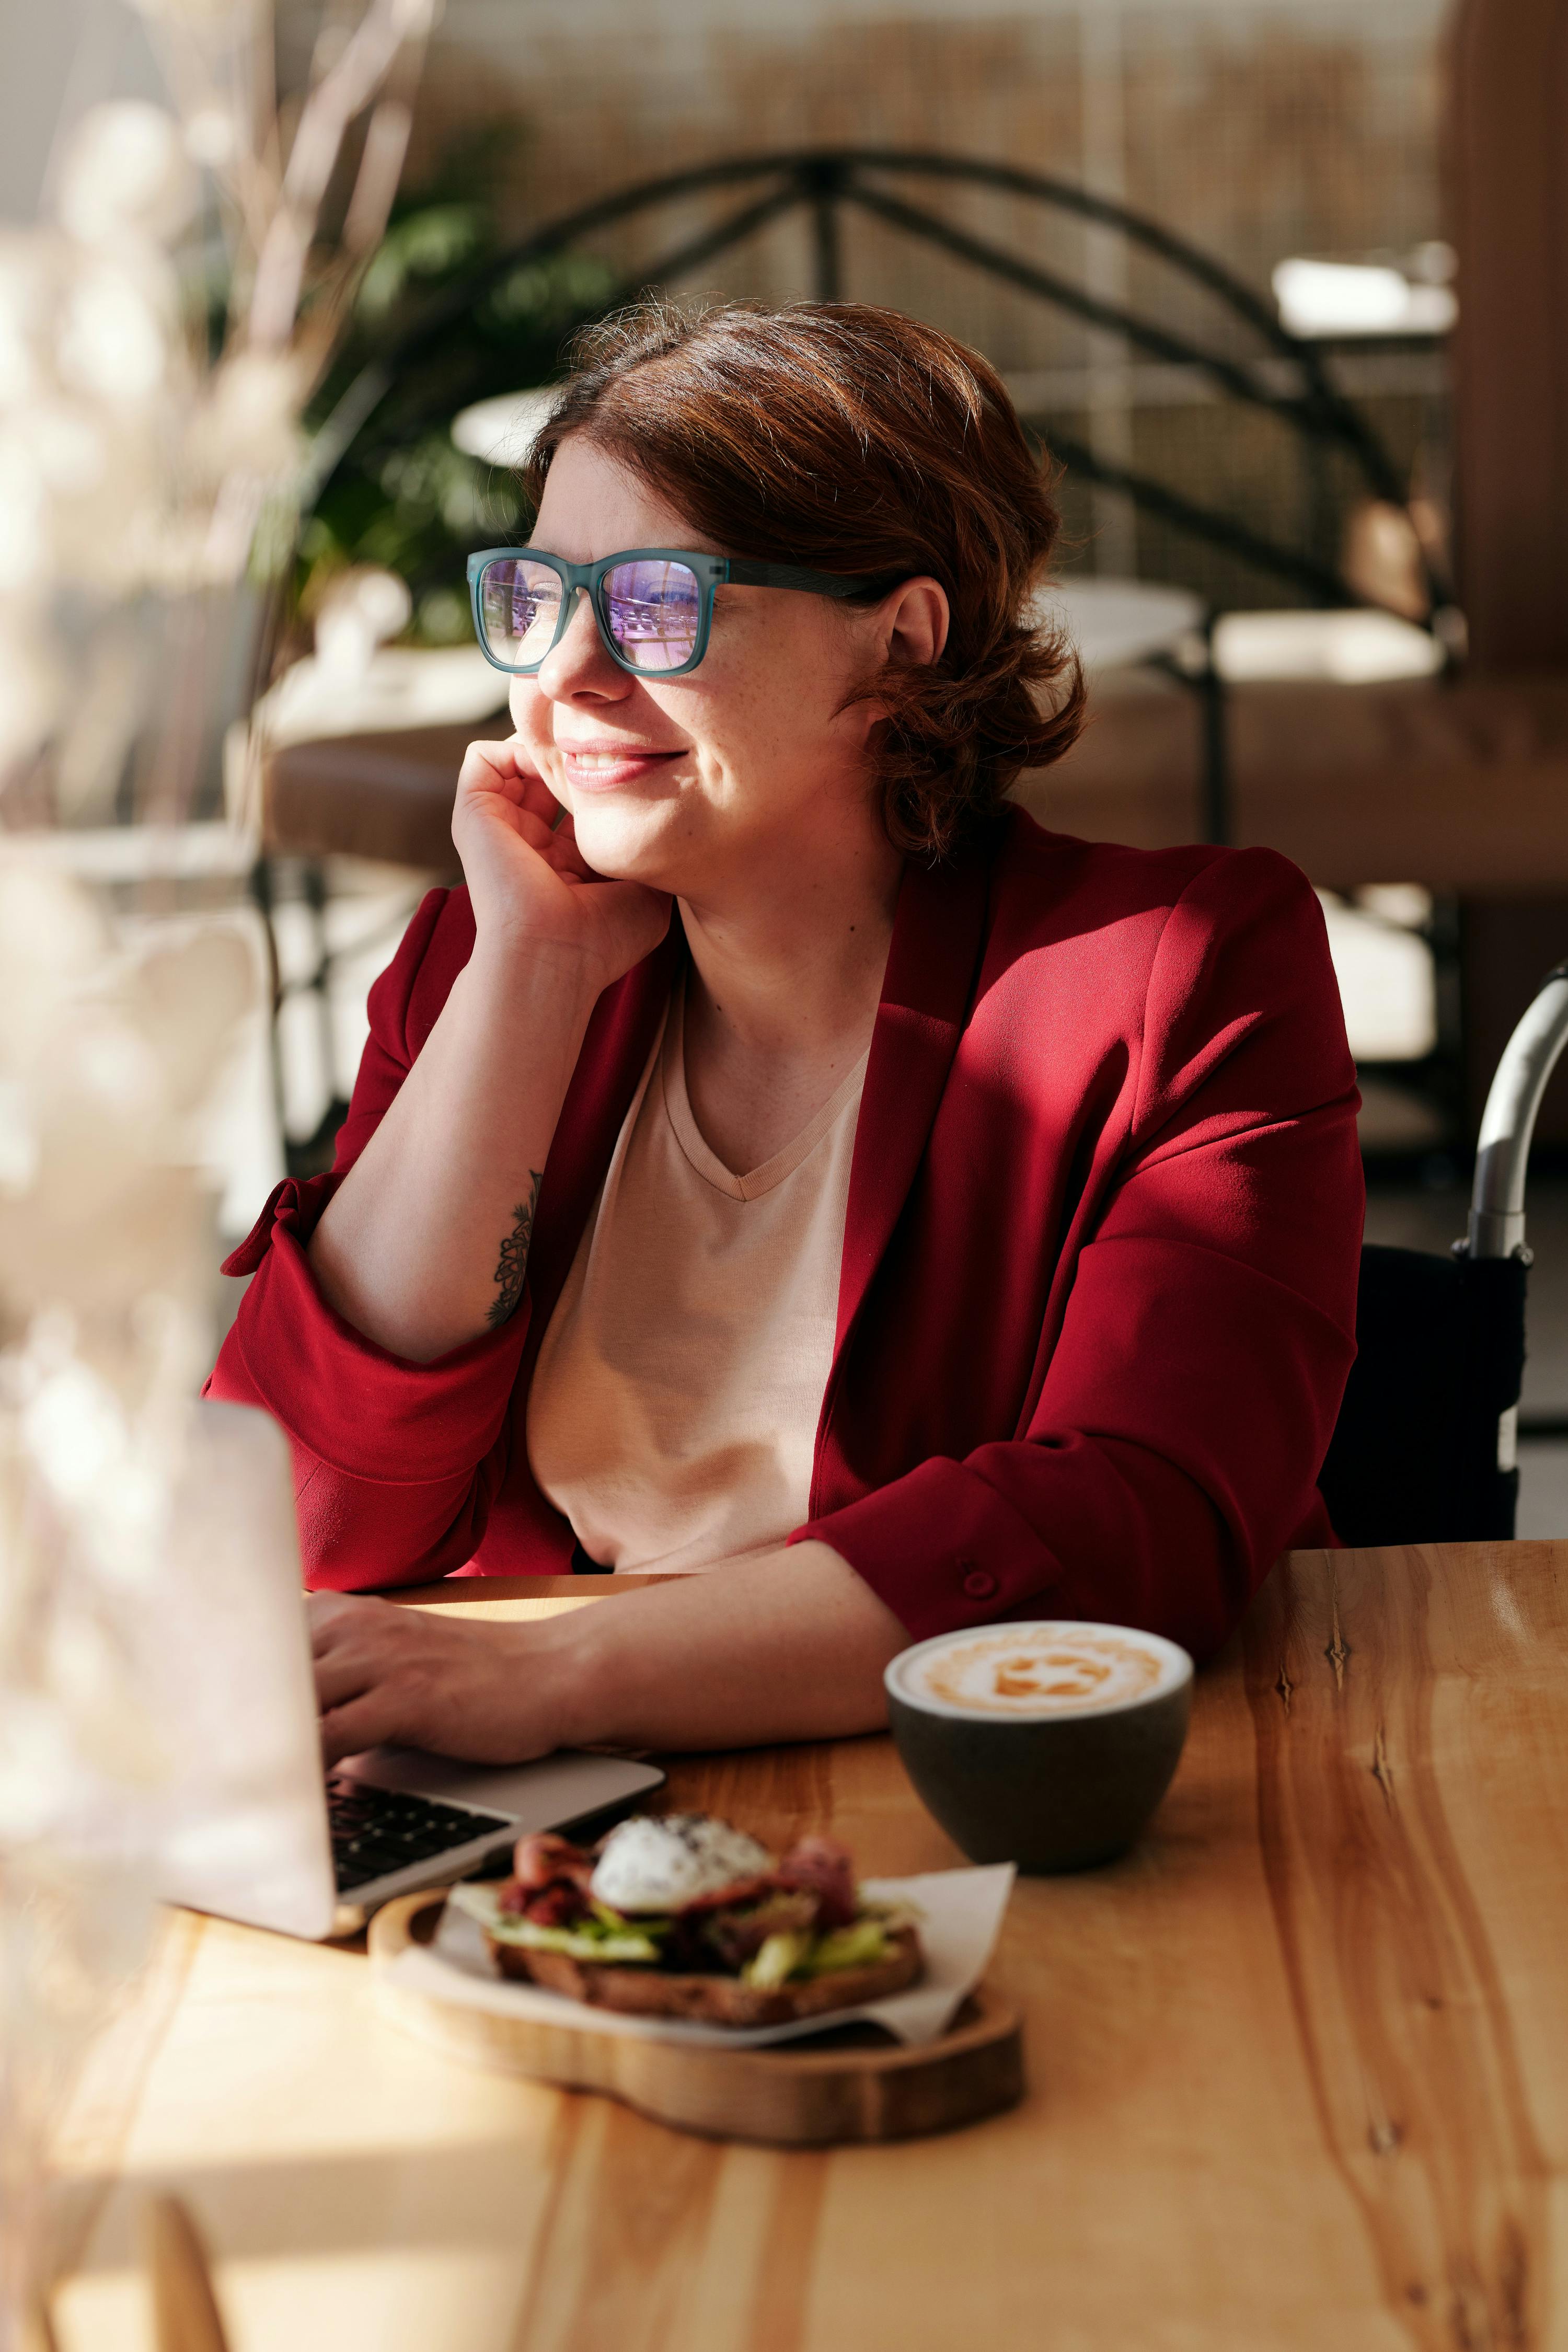 Woman wearing blue glasses using a laptop at a cafe with coffee and toast on the table